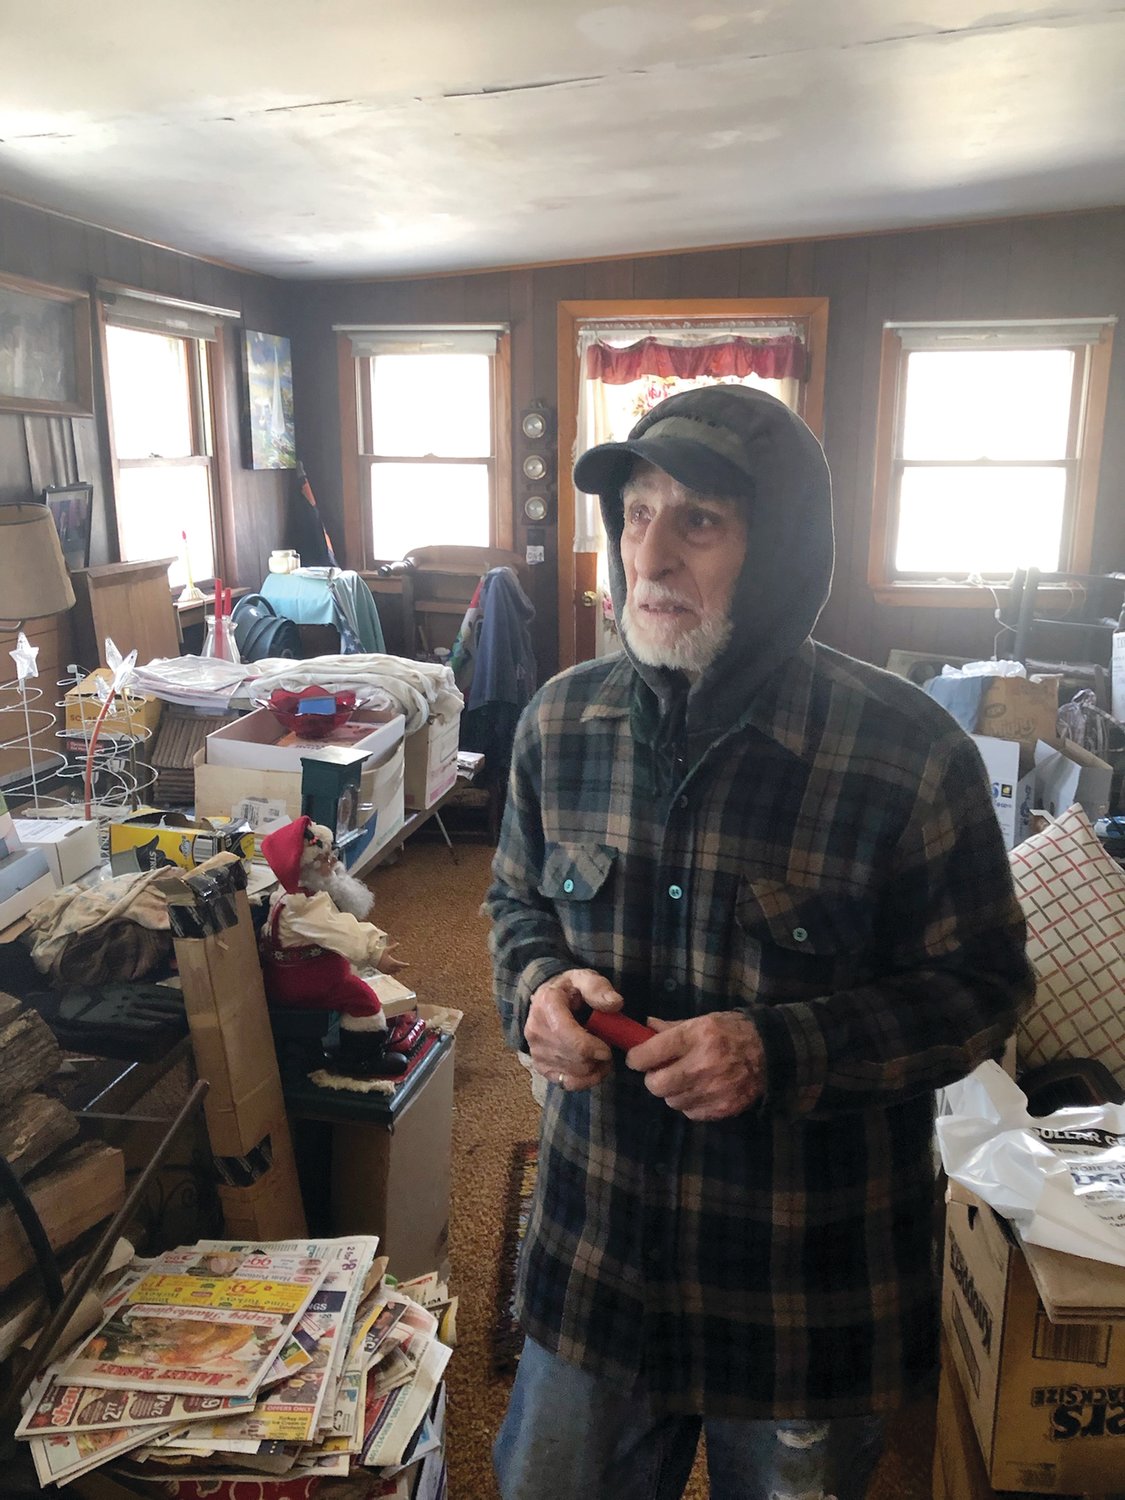 NEARLY LOST: When a tree fell on 91-year-old Korean War veteran Bernie Pavia’s home last Christmas, he nearly lost everything as snow melted and saturated the walls, ceilings and all his possessions.